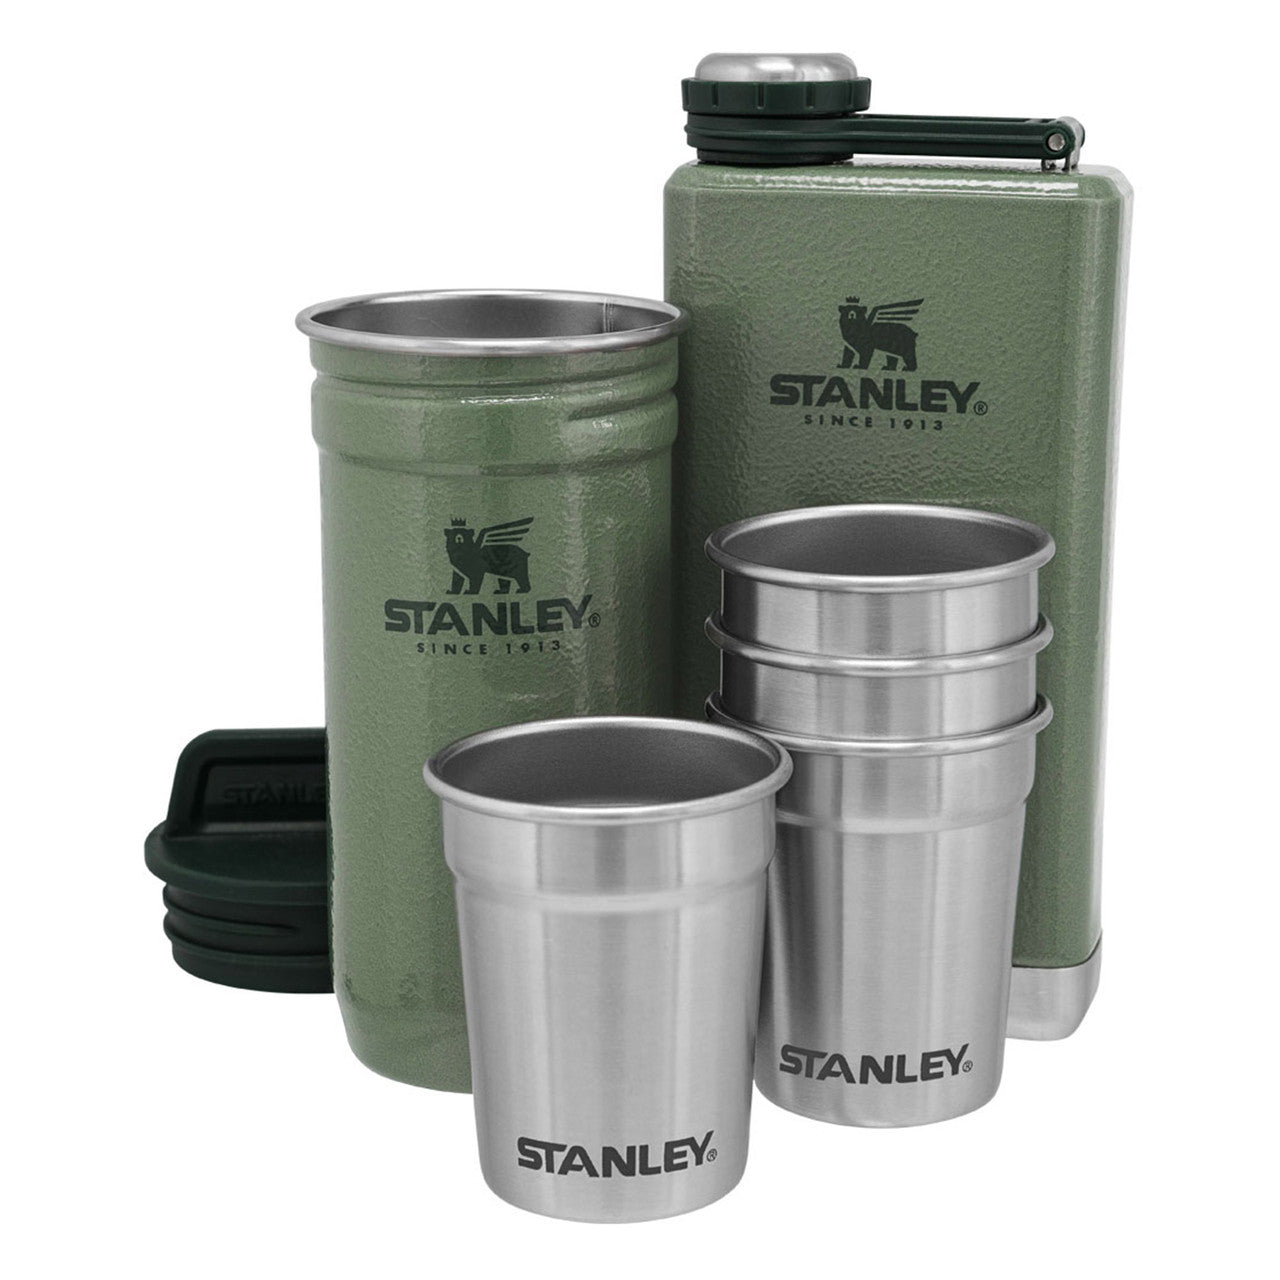 Stanley Stainless Steel Shot Glass Set and Flask